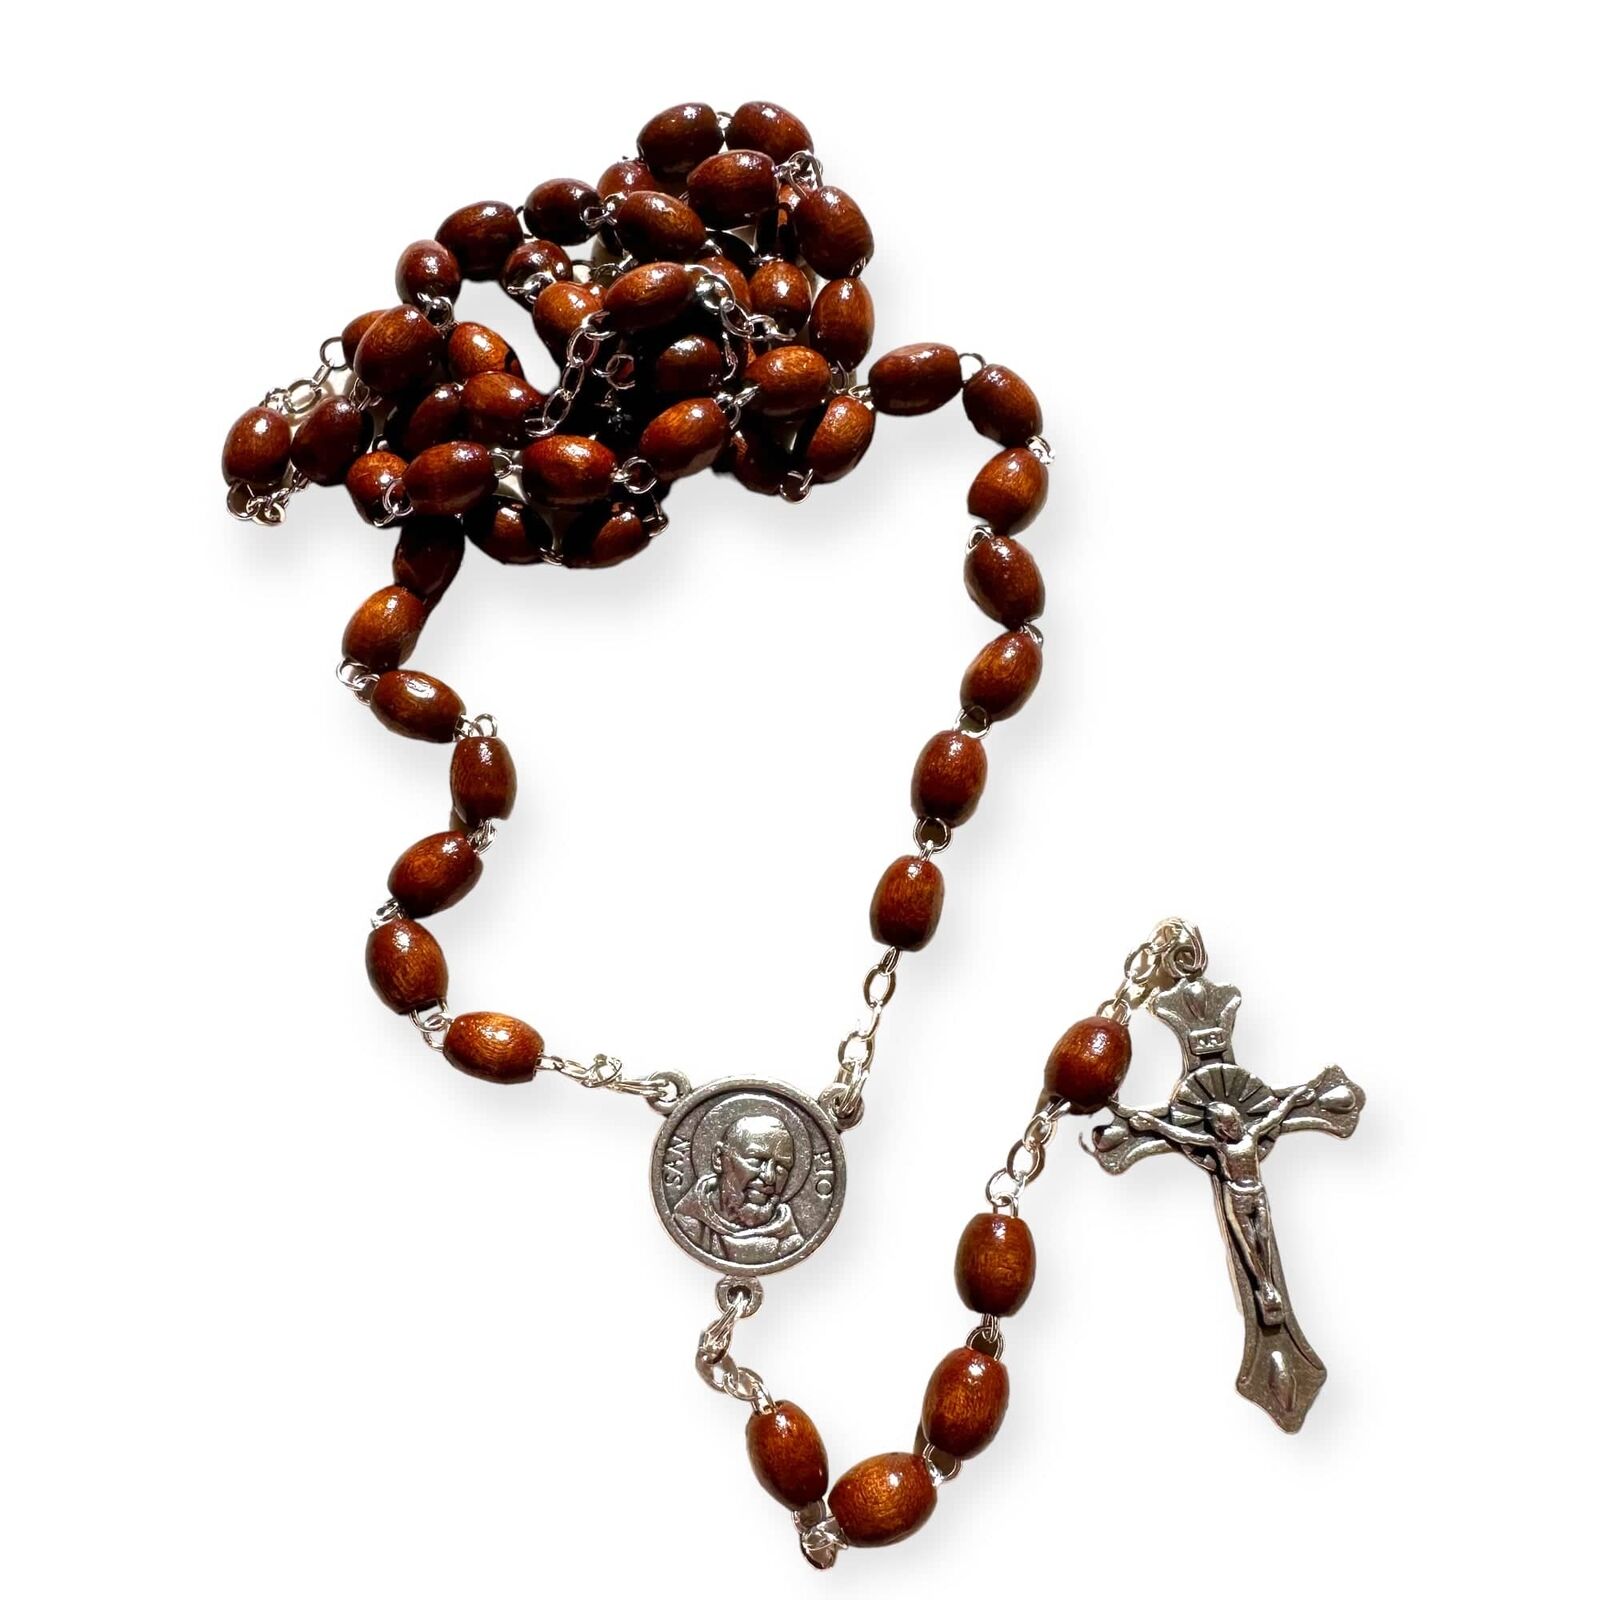 St. Padre Pio Relic Rosary Blessed By Pope w/ 2nd Class Relic - St. Father Pio